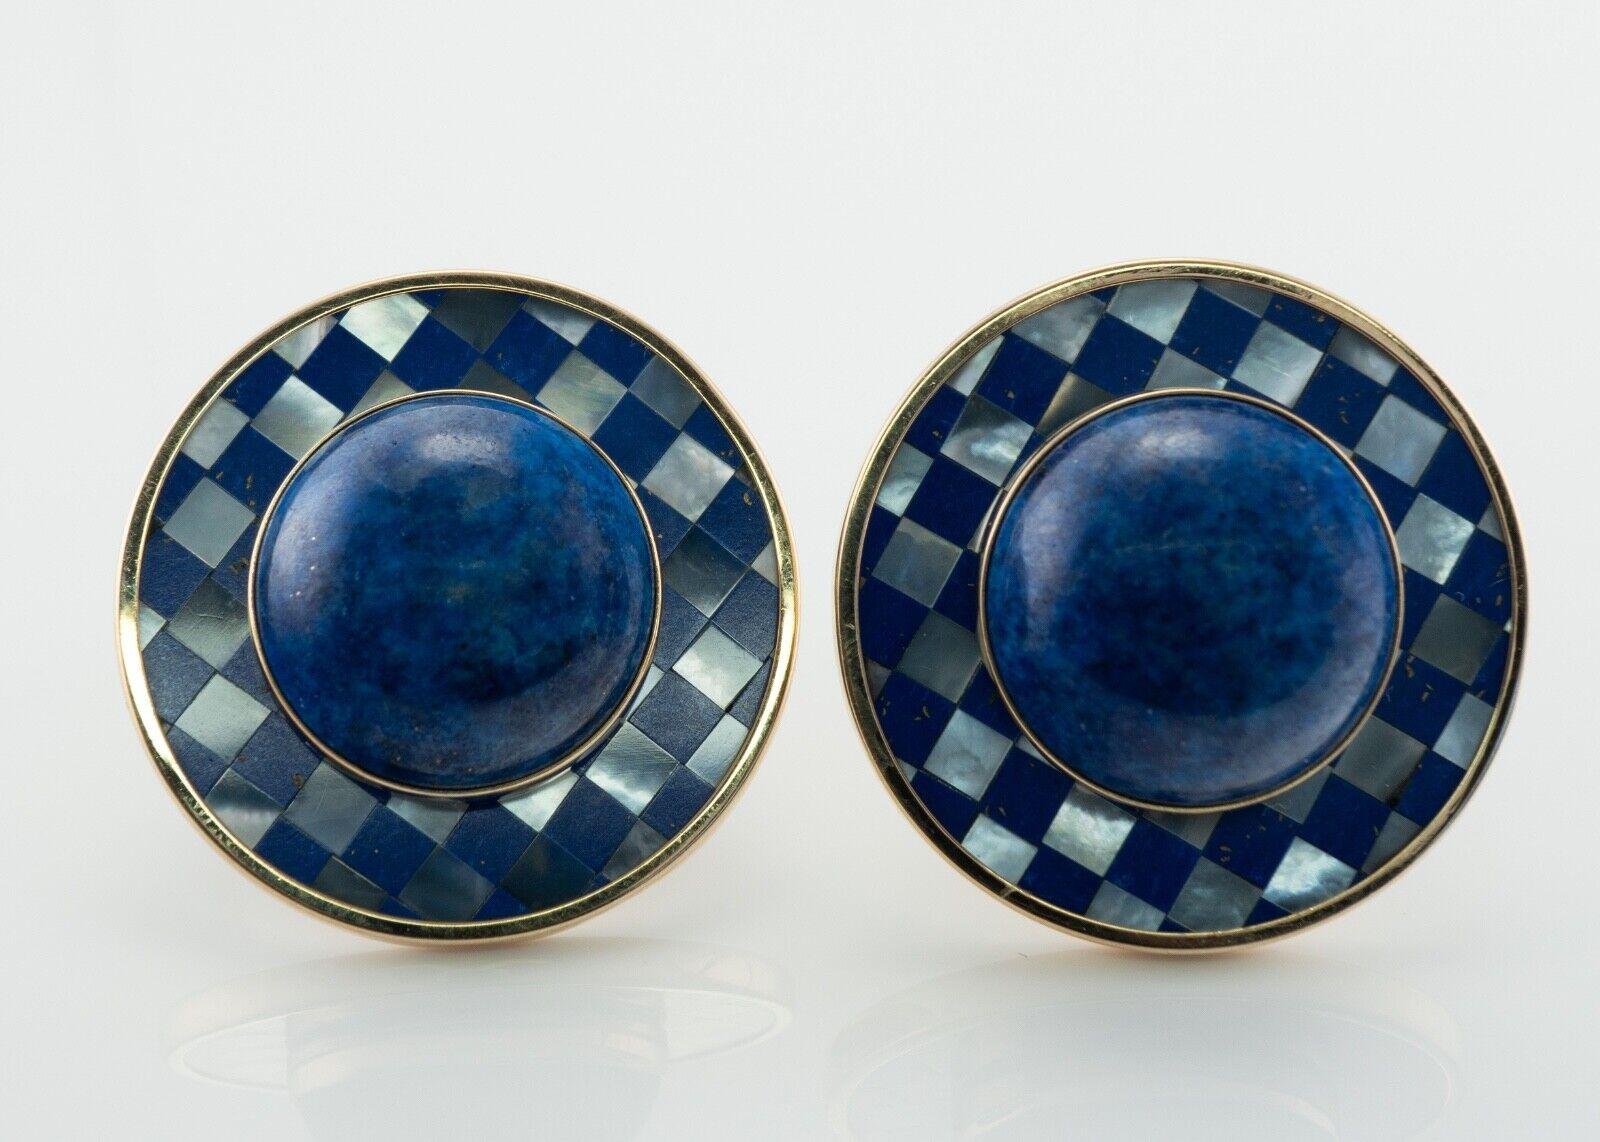 Peter Brams Lapis Lazuli Earrings Mother of Pearl 14K Gold

This unique pair of earrings is finely crafted in solid 14K Yellow gold and set with genuine Lapis Lazuli and Mother of Pearl. The center Lapis cabochon measures 17mm. Each earring is 30mm